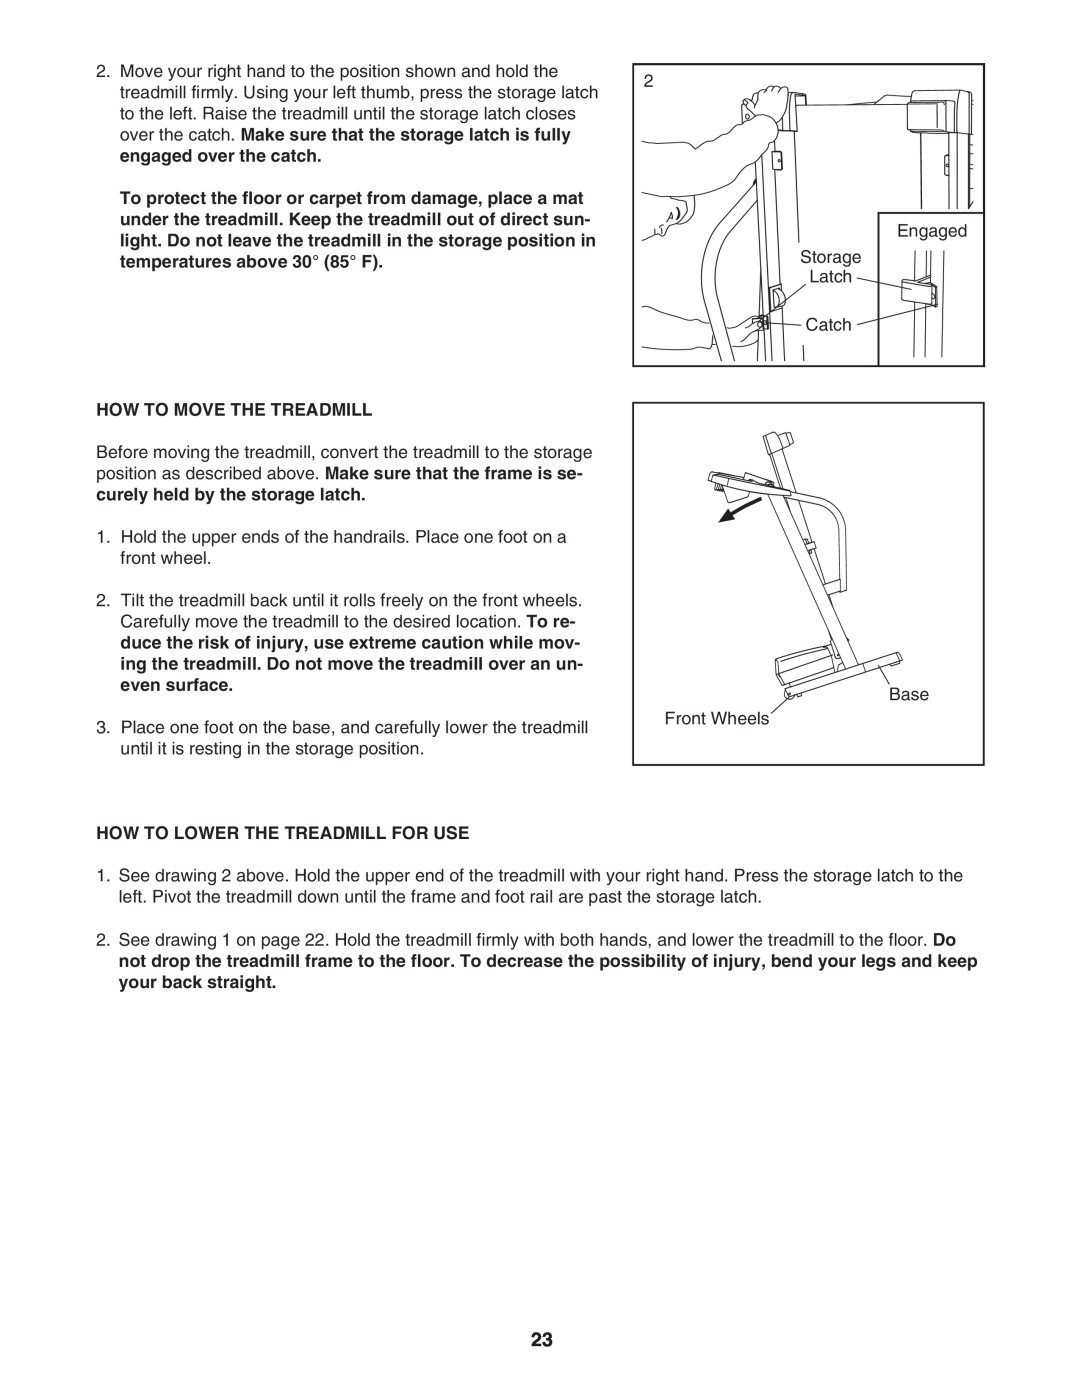 ProForm 30514.0 user manual How To Move The Treadmill, How To Lower The Treadmill For Use 